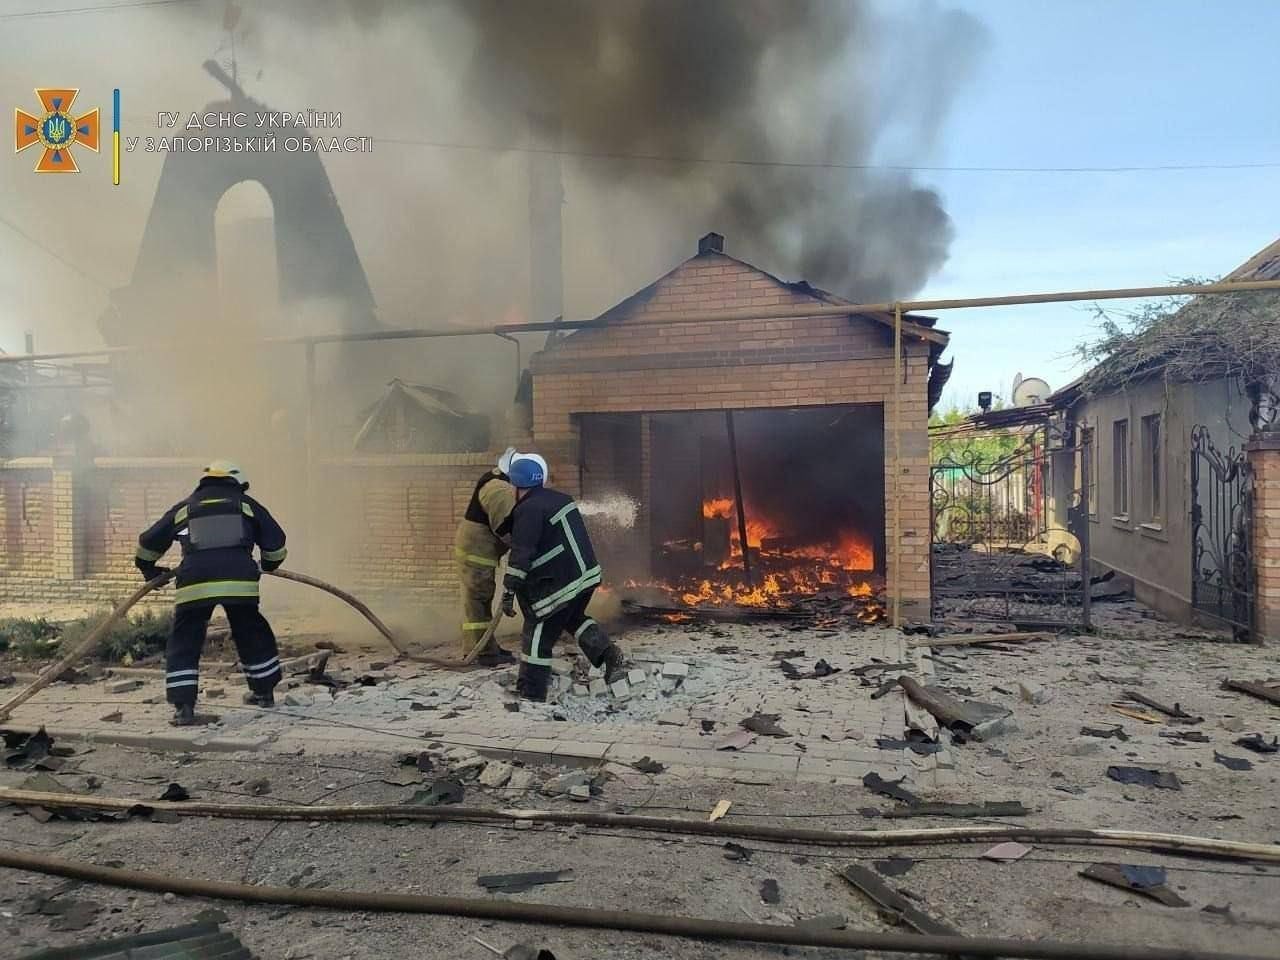 WAR ZONE: Julia and Stacy are from Zaporizhzhia which is currently under Russian occupation. Their street back home is pictured following a missile attack with Ukrainian firefighters putting out the fires.